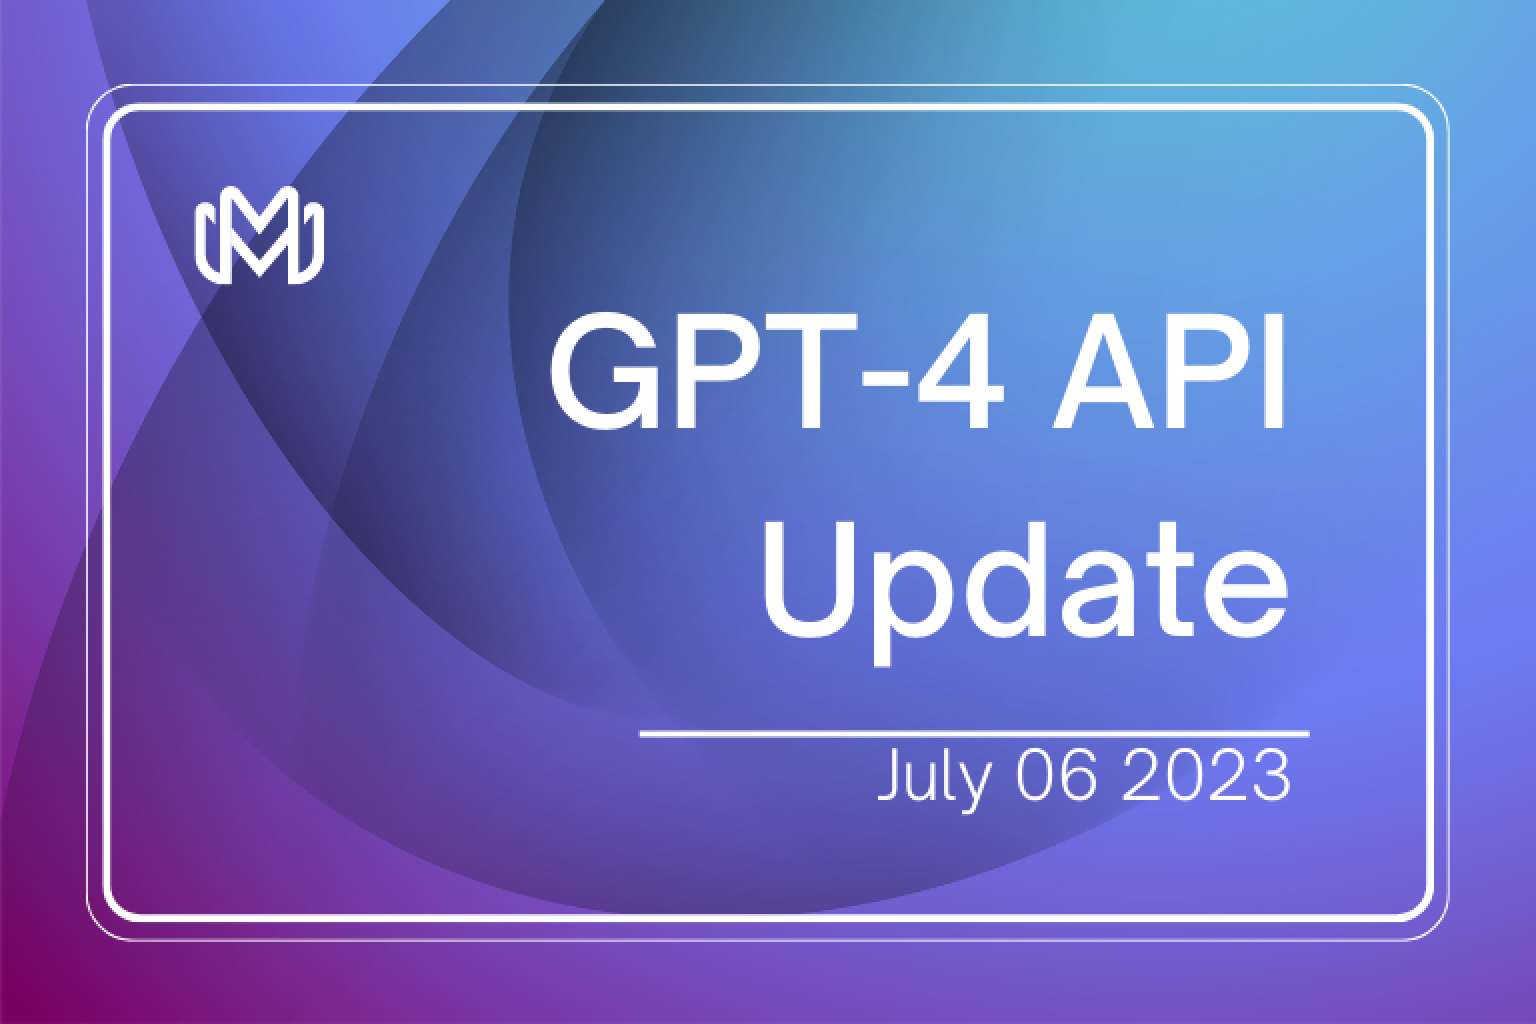 Is chat GPT provided for free - API - OpenAI Developer Forum